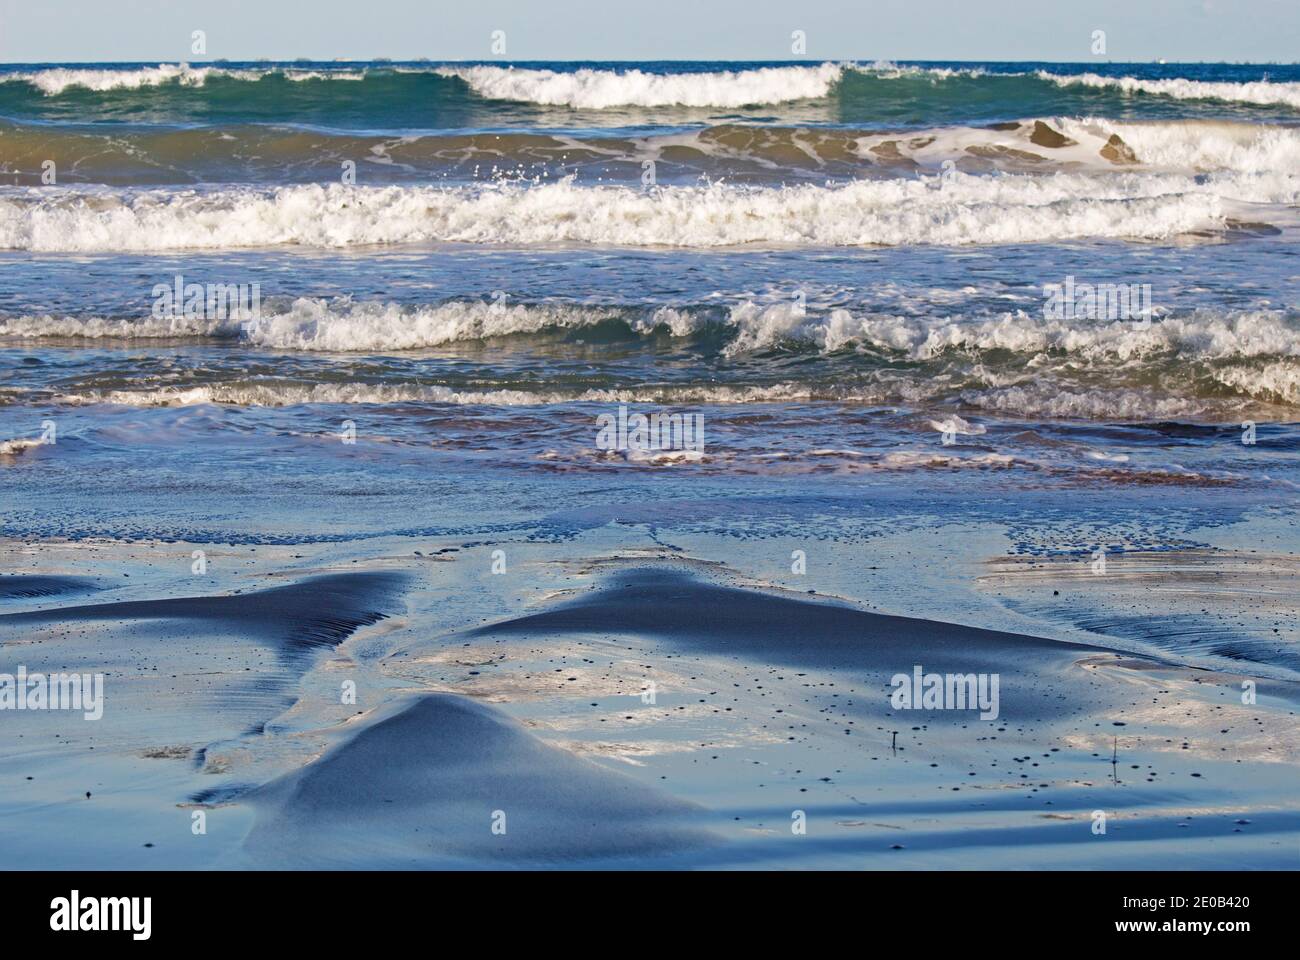 The sea can create some rather interesting effects - flowing onto the sand beach and dispersing over the channels formed. Stock Photo